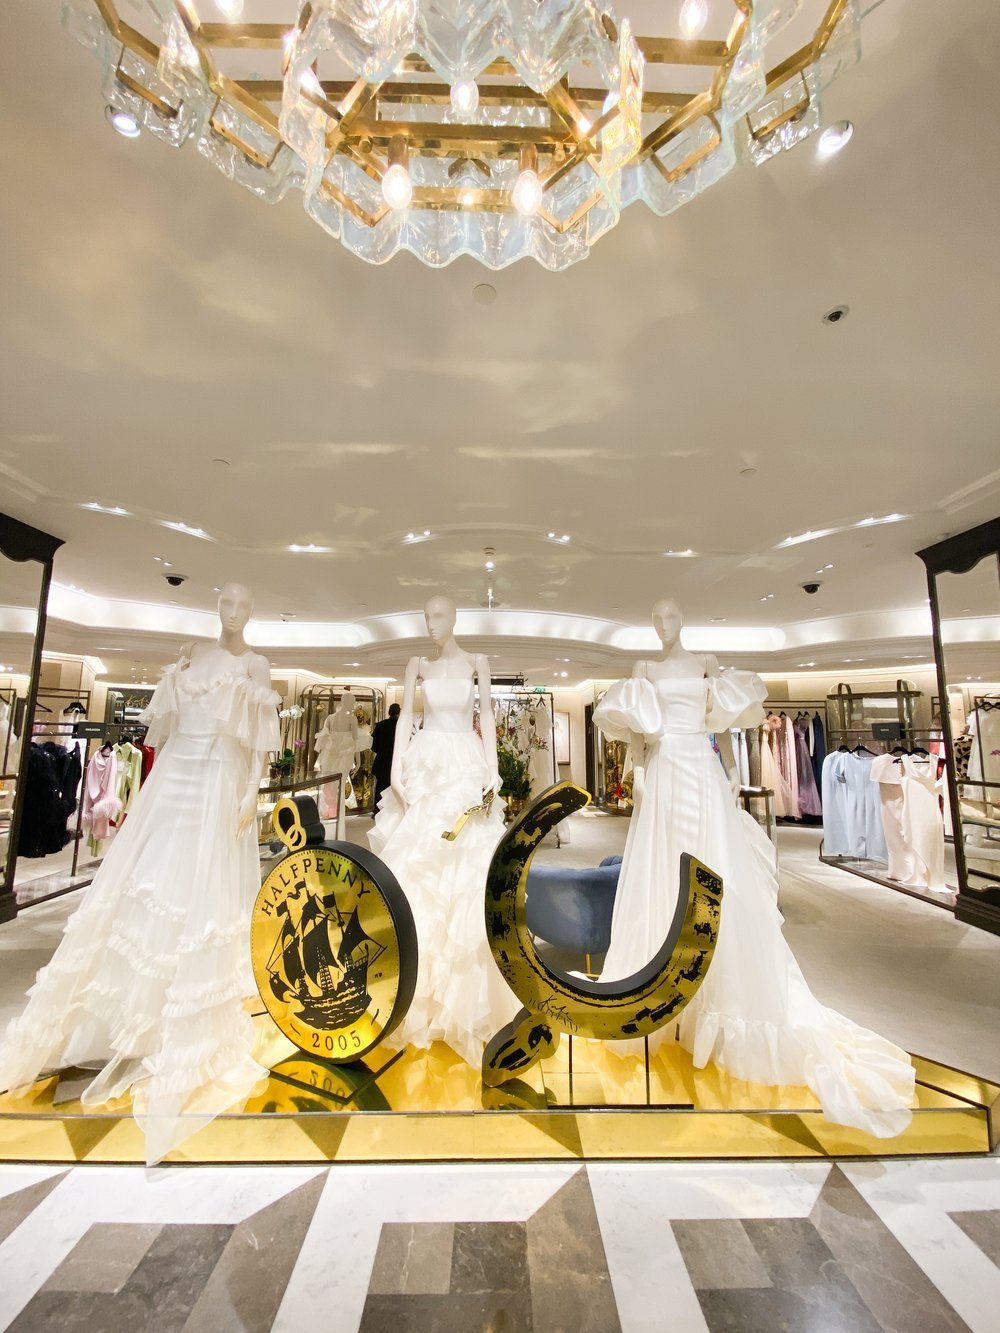 The Month of Love | Kate Halfpenny pop-up on the Harrods womenswear floor